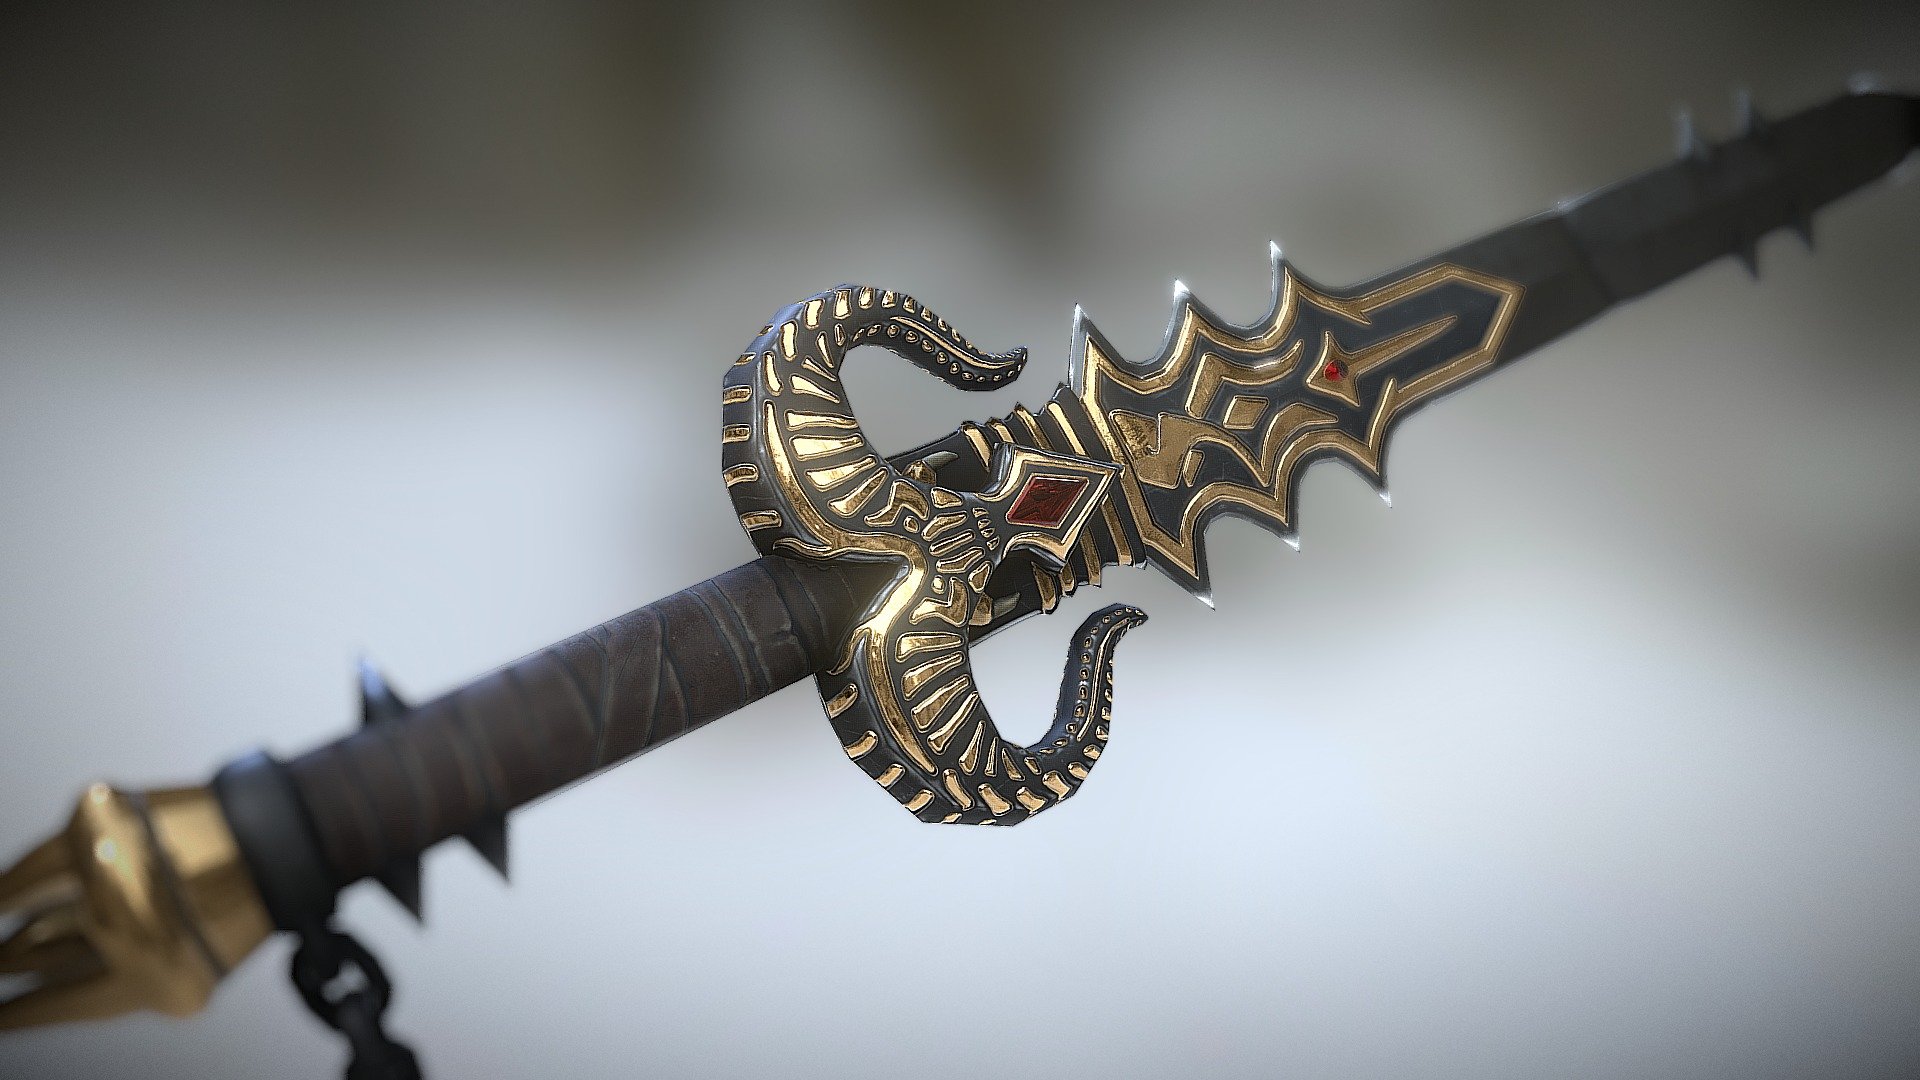 This was a sword made in Maya, Photoshop, Quixel Suite, and xNormal based off of concept art from The Art of Blizzard Entertainment book 3d model